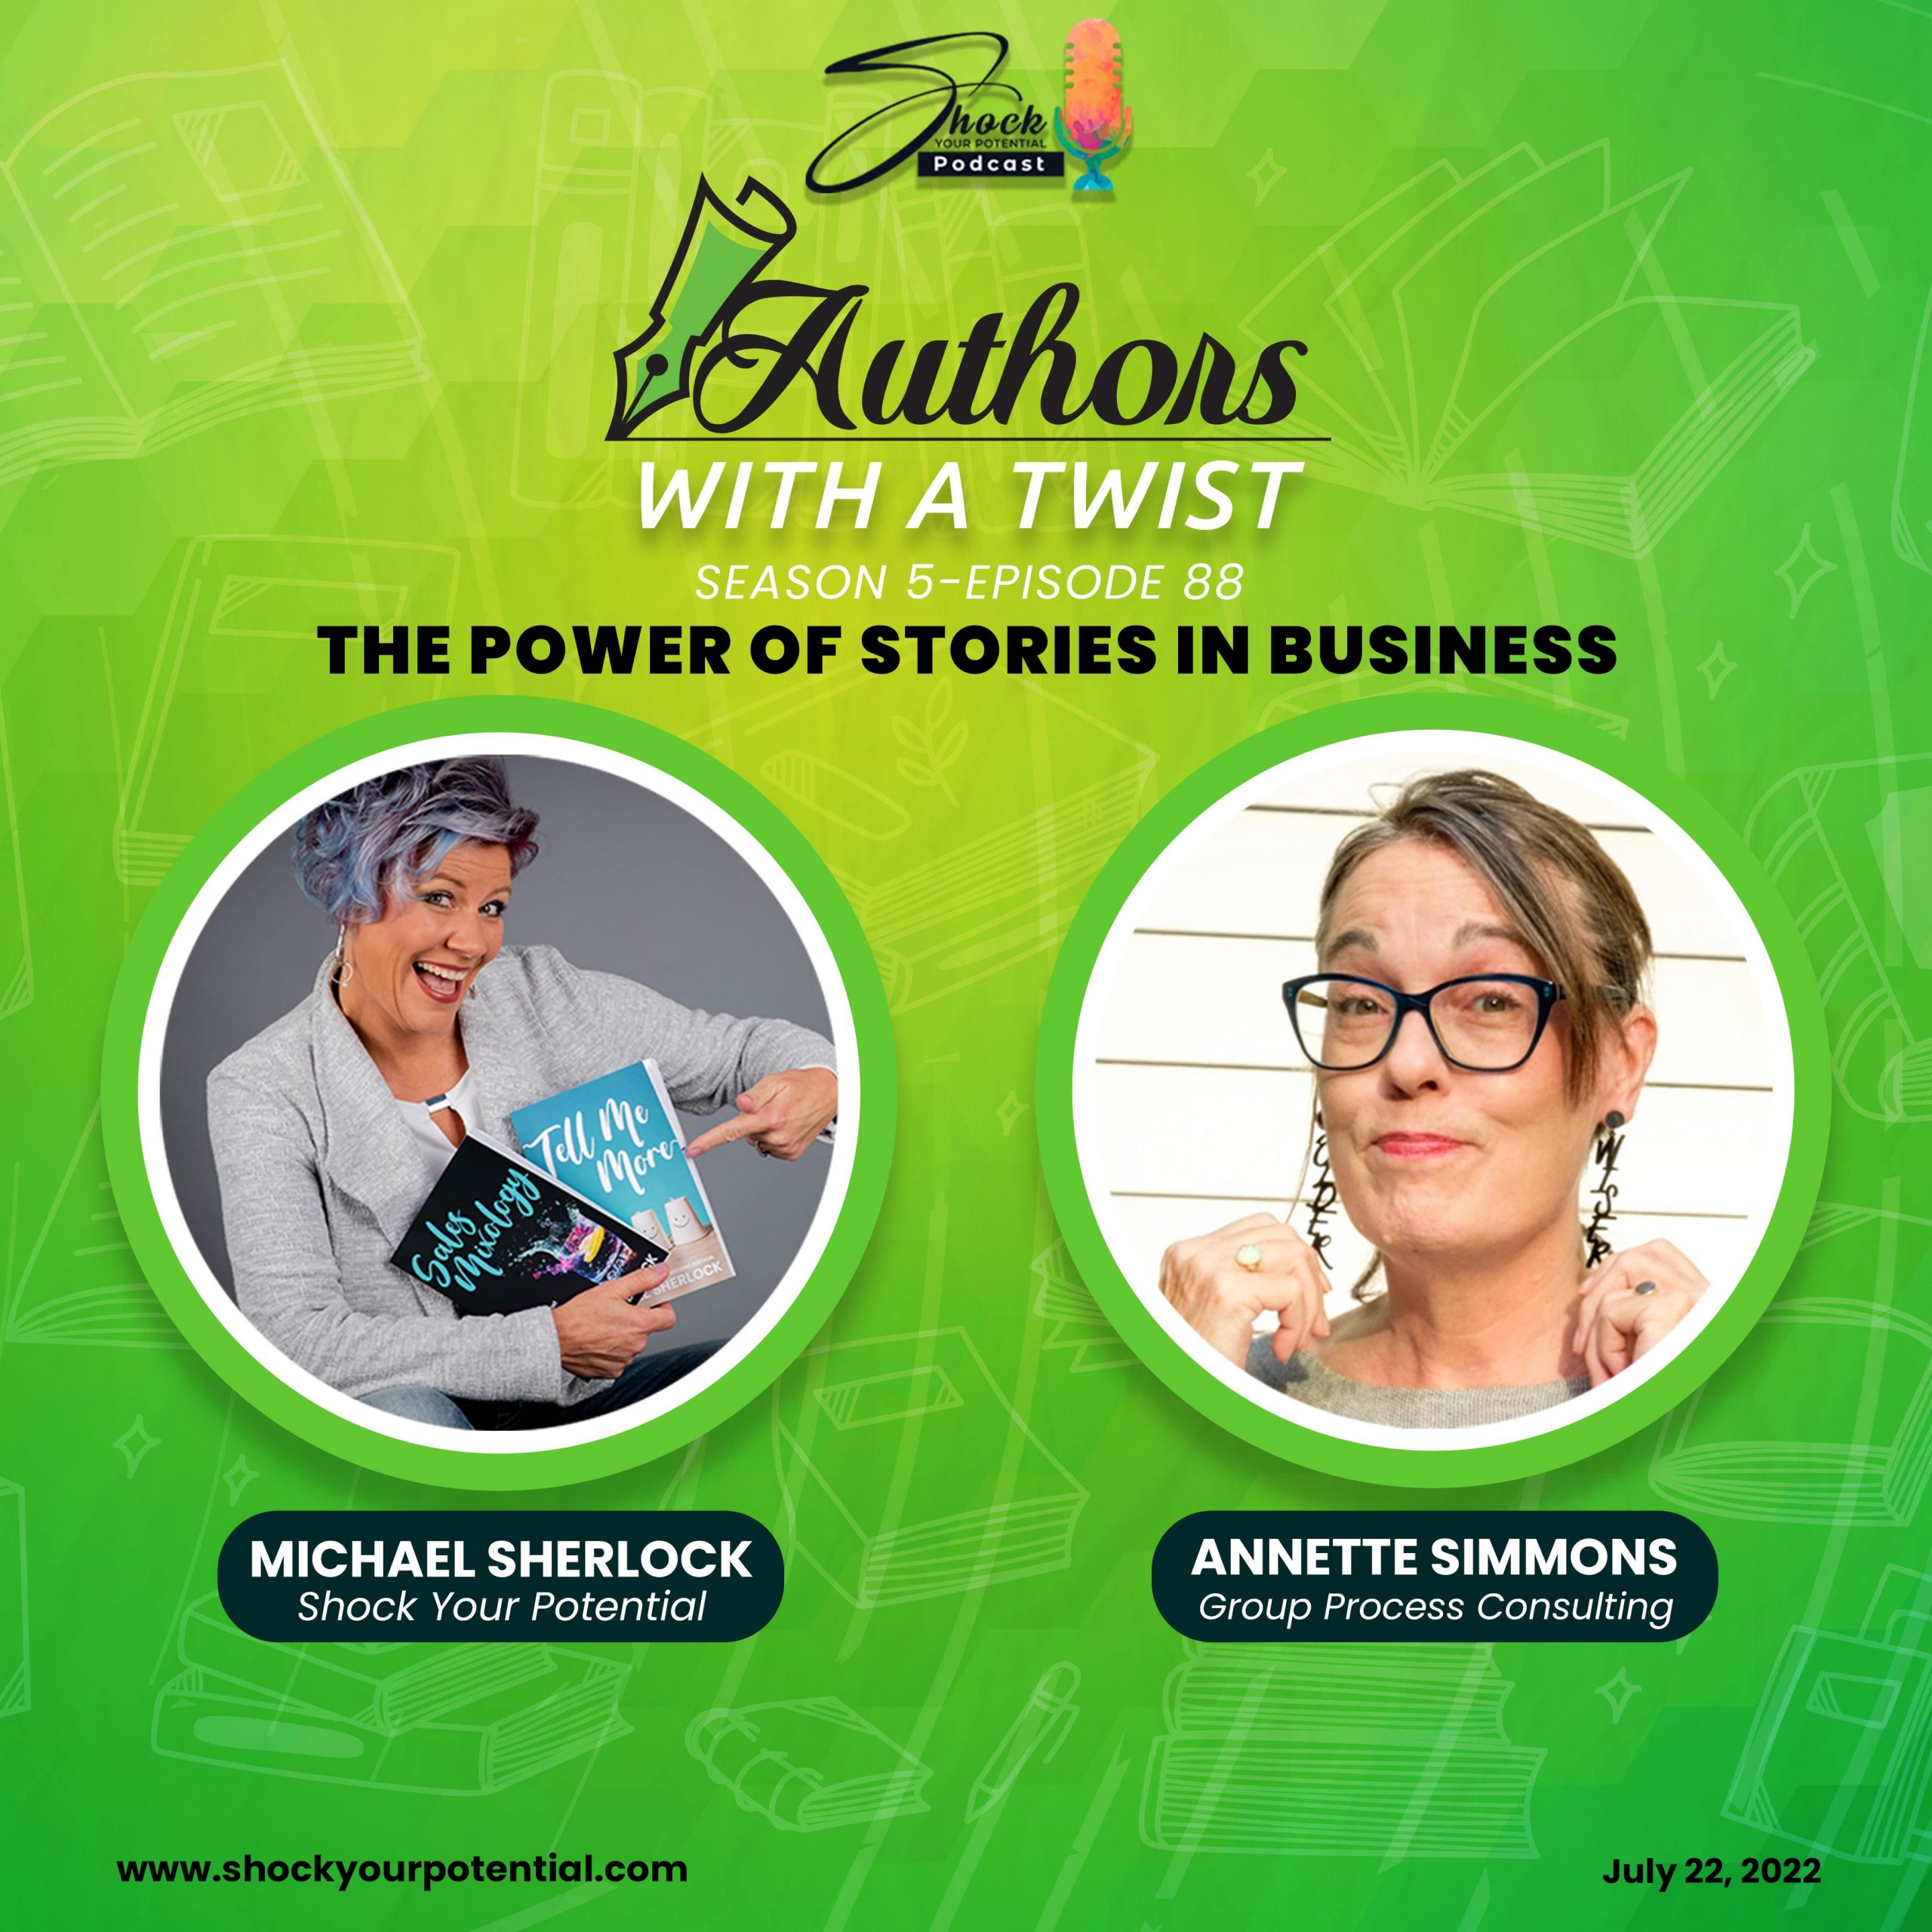 The Power of Stories in Business – Annette Simmons